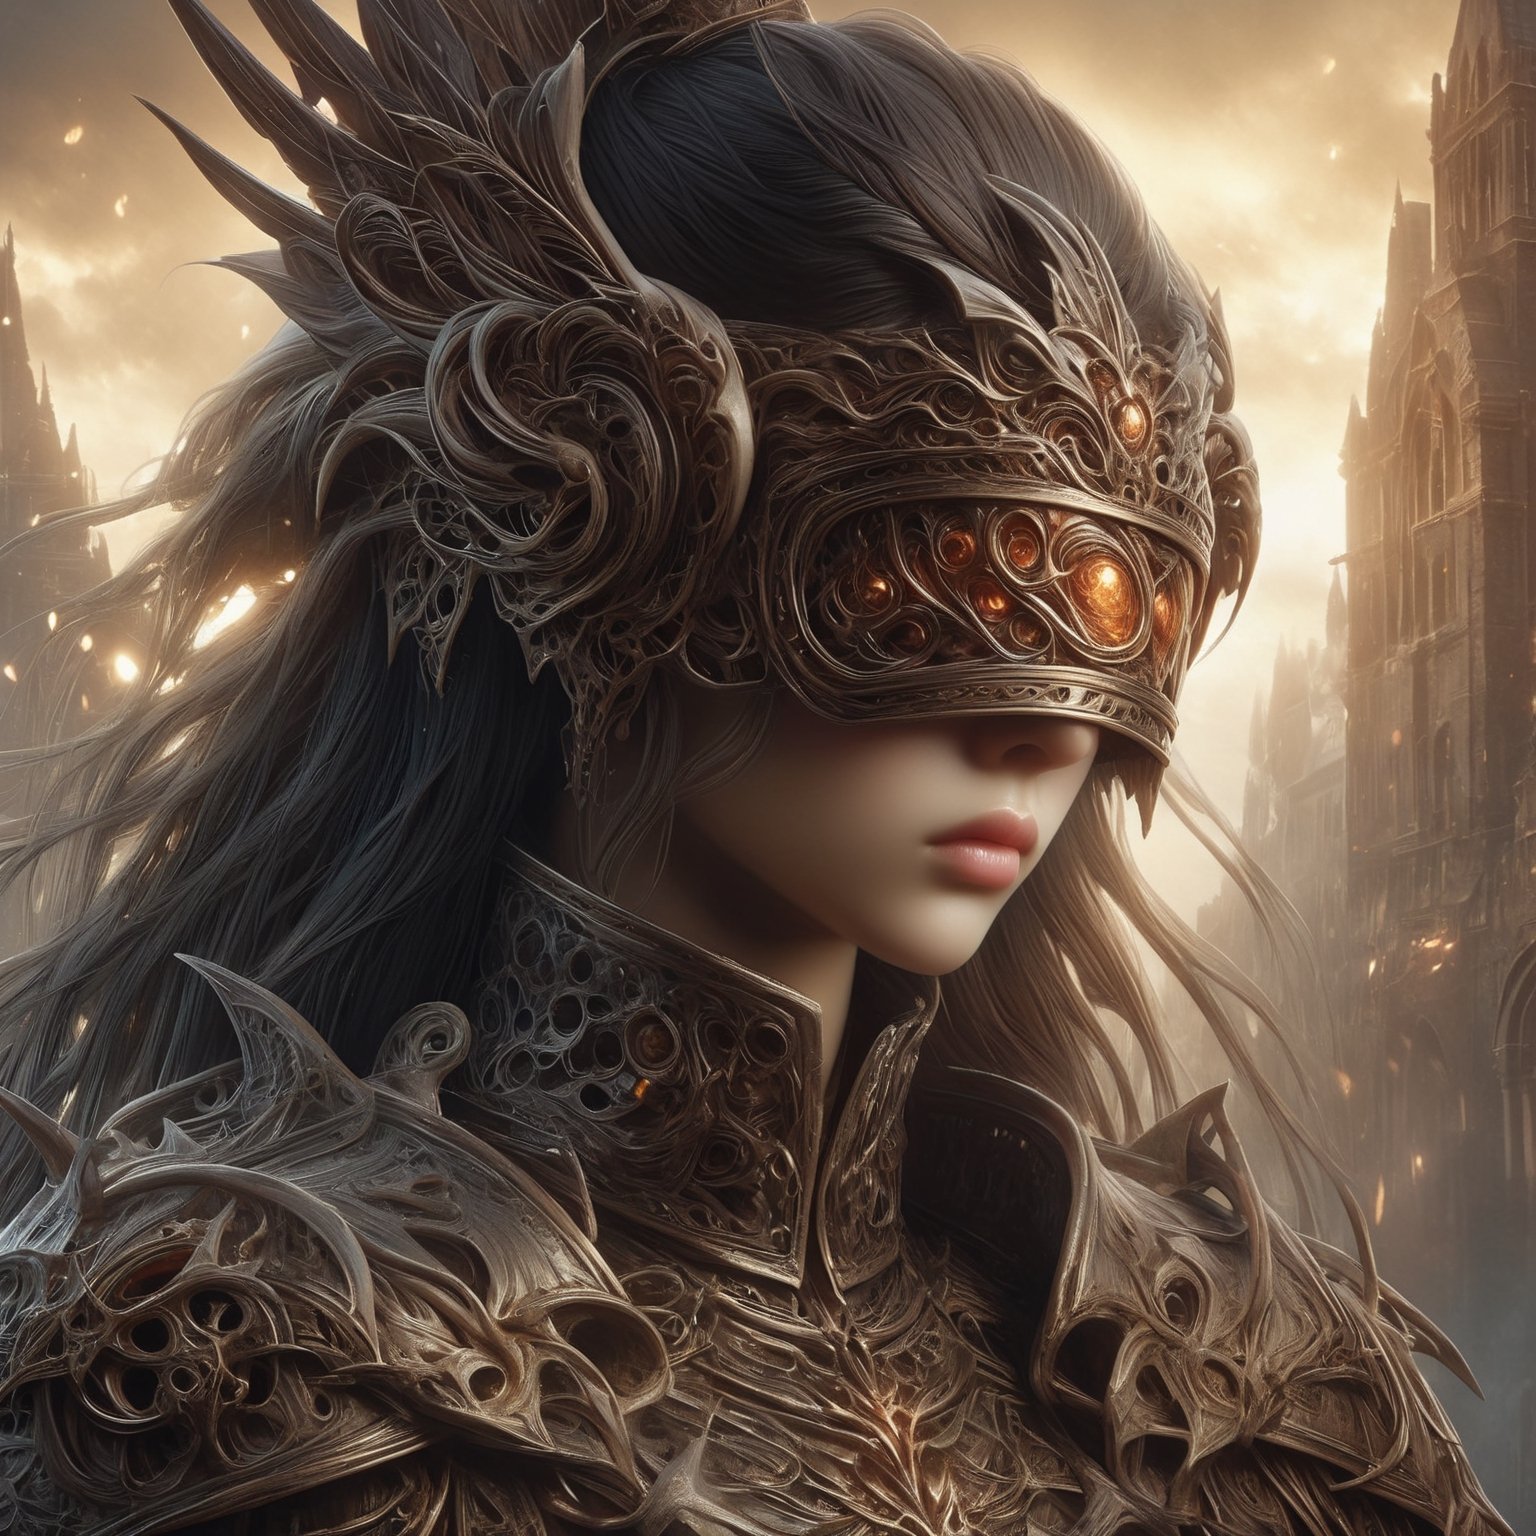 "Dark romance fantasy, close up of a woman wearing a bl1ndm5k over her face and dragon bone armor, standing above a wartorn city, an army looking up at her, embers", bones, ribcage style armor, eldritch, dracolich-like armor, Masterpiece, Intricate, Insanely Detailed, Art by lois van baarle, todd lockwood, chris rallis, anna dittmann, Kim Jung Gi, Gregory Crewdson, Yoji Shinkawa, Guy Denning, Textured!!!!, Chiaroscuro!!, actionpainting, best quality, masterpiece,DracolichXL24,art_booster,LegendDarkFantasy,ellafreya,renny the insta girl,real_booster,bl1ndm5k